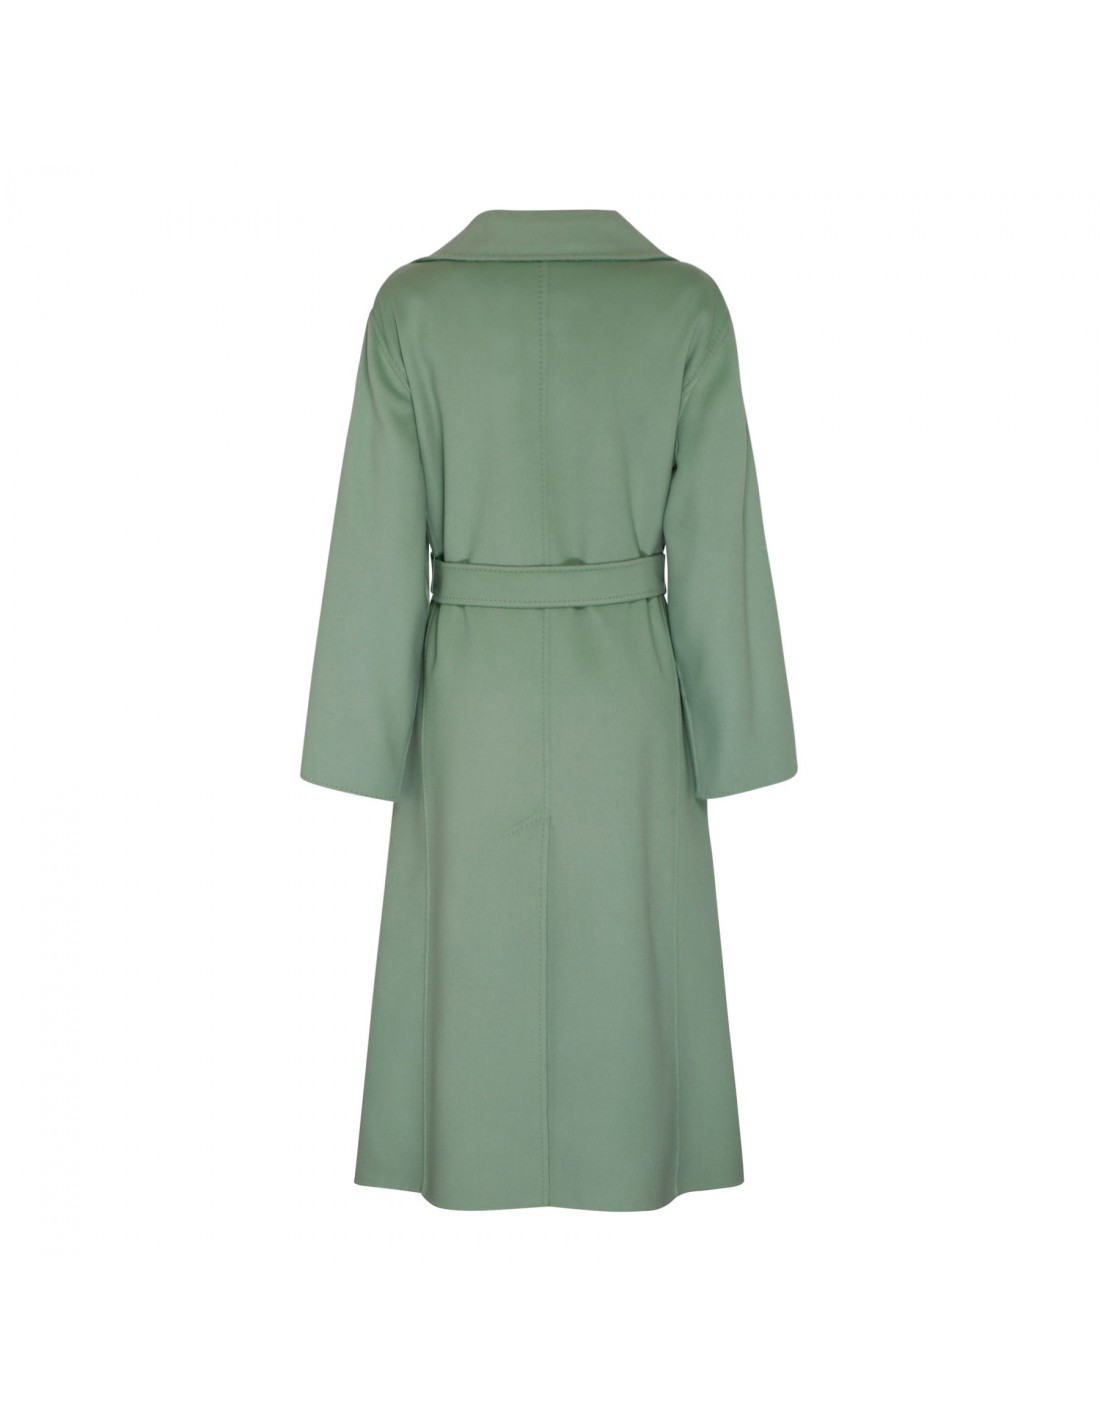 Mint green wool and cashmere coat